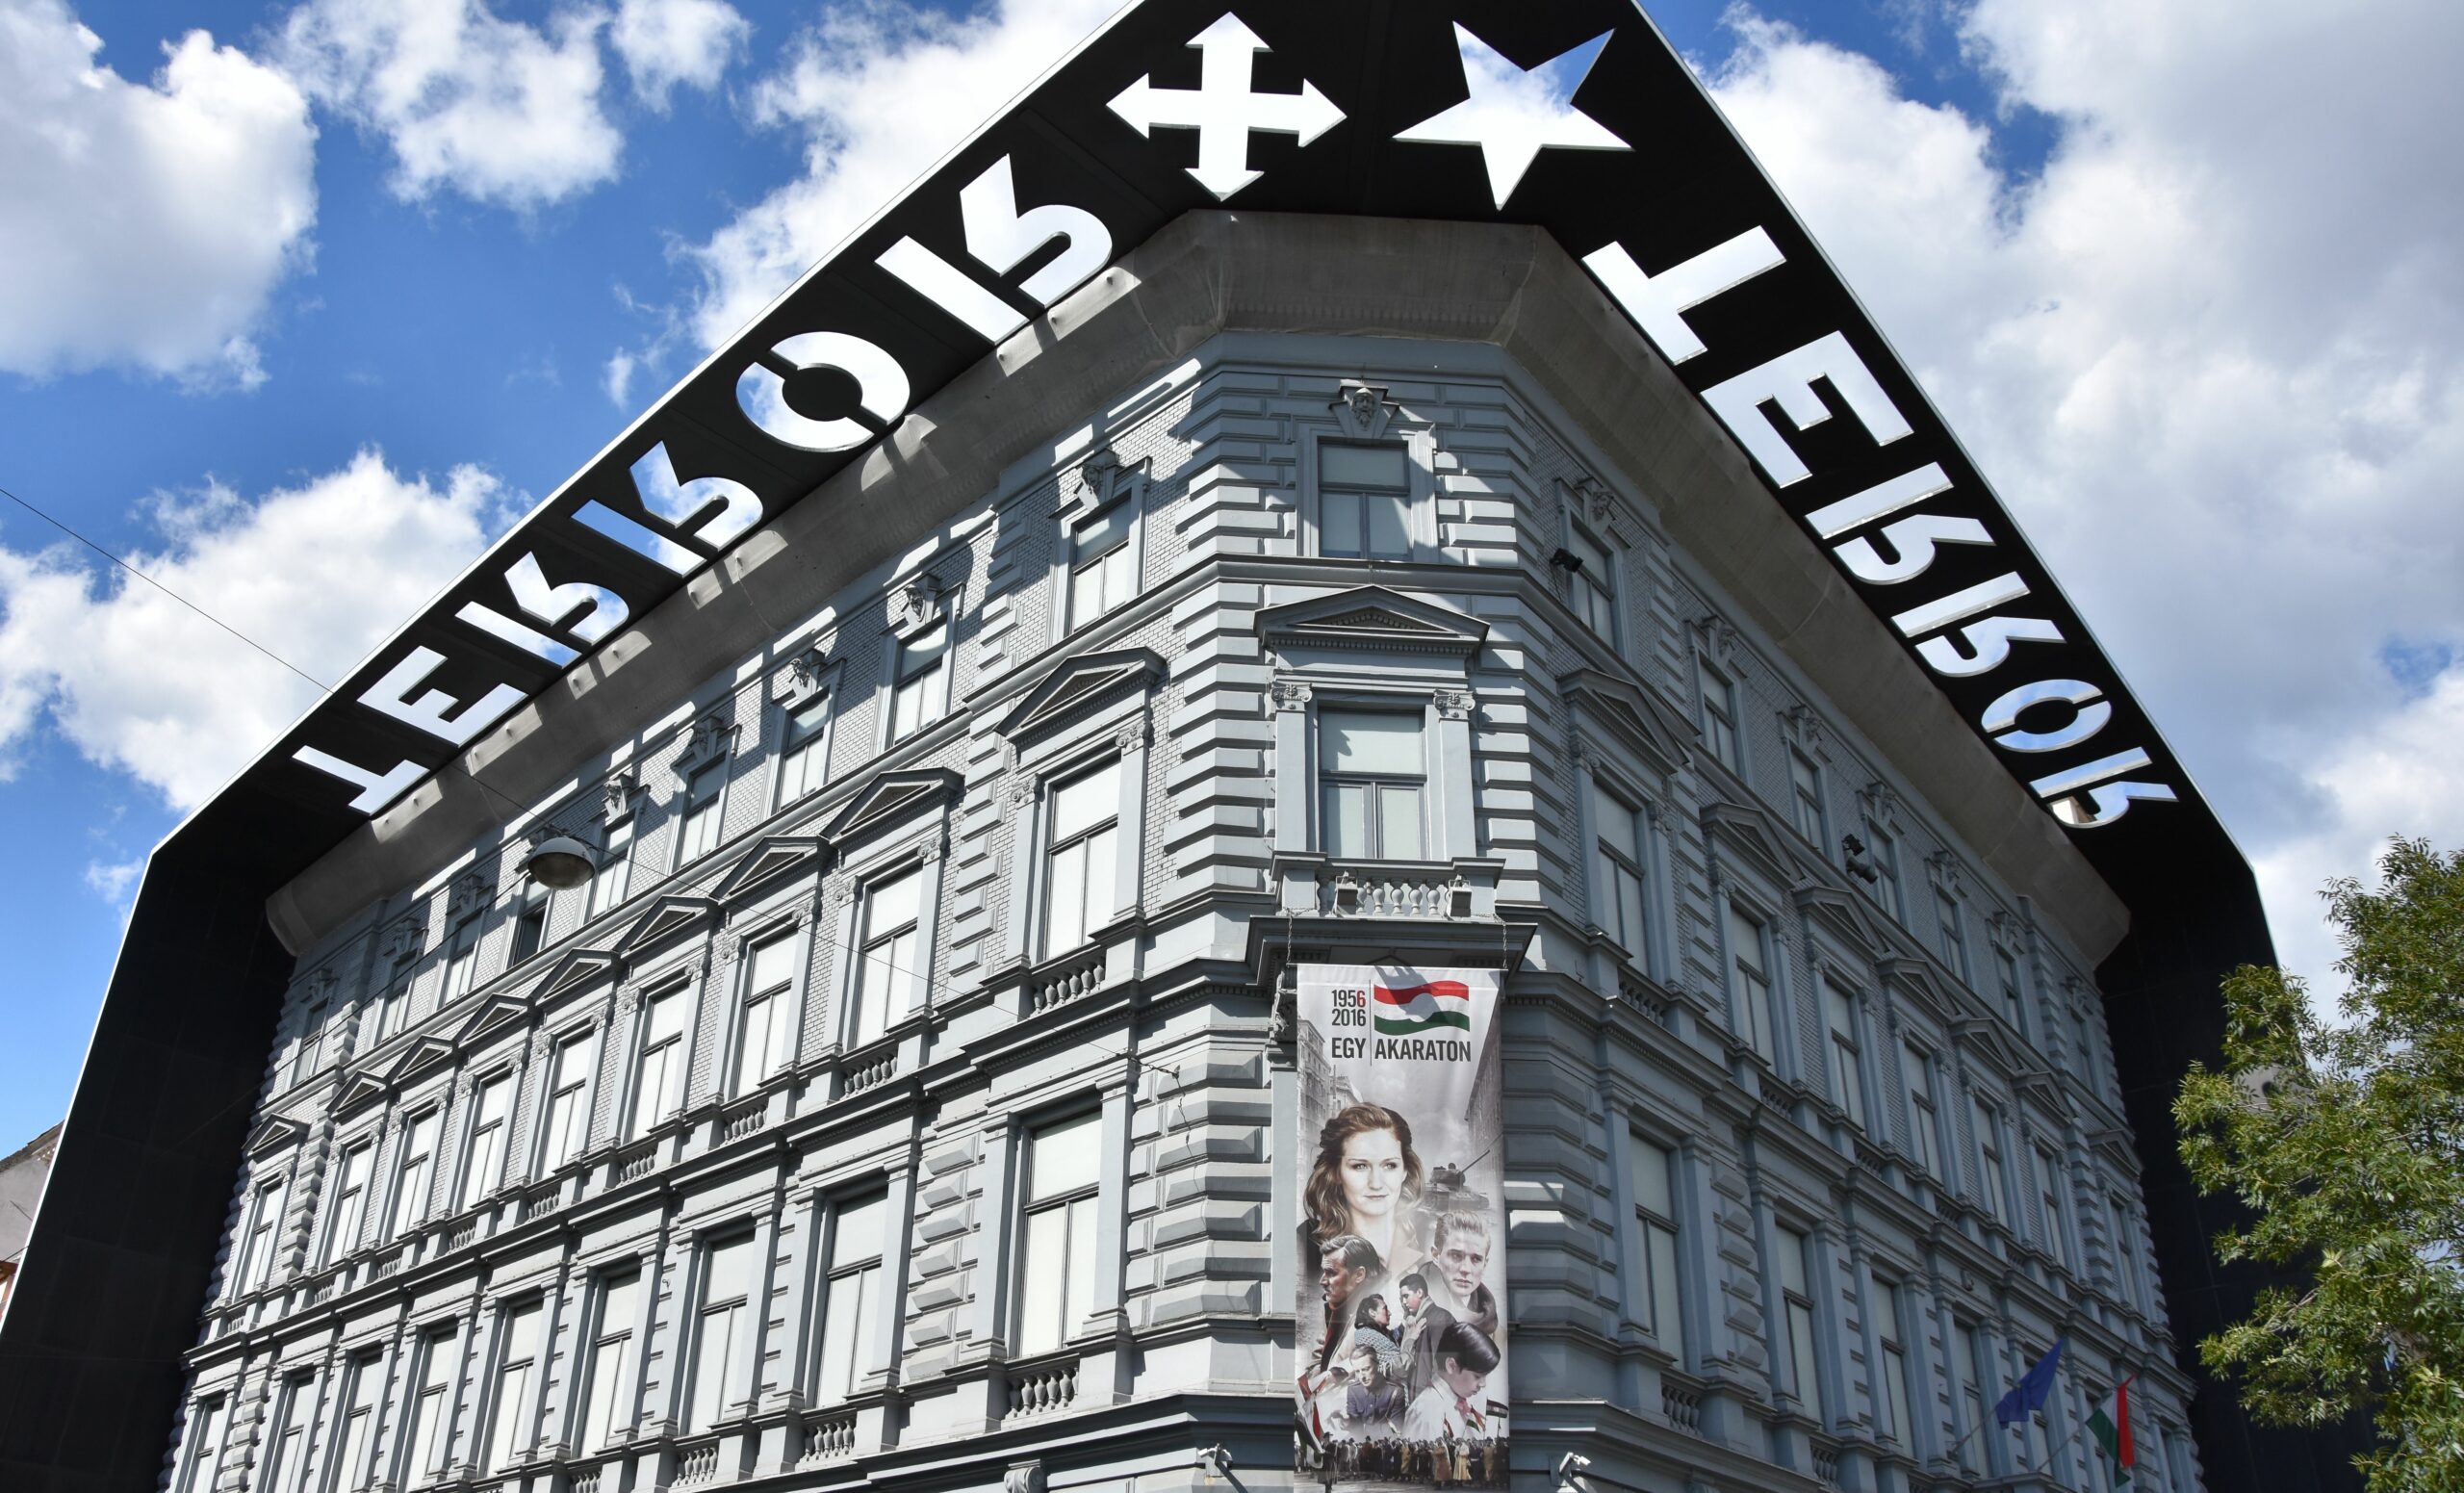 The main facade of the House of Terror museum in Budapest, Hungary